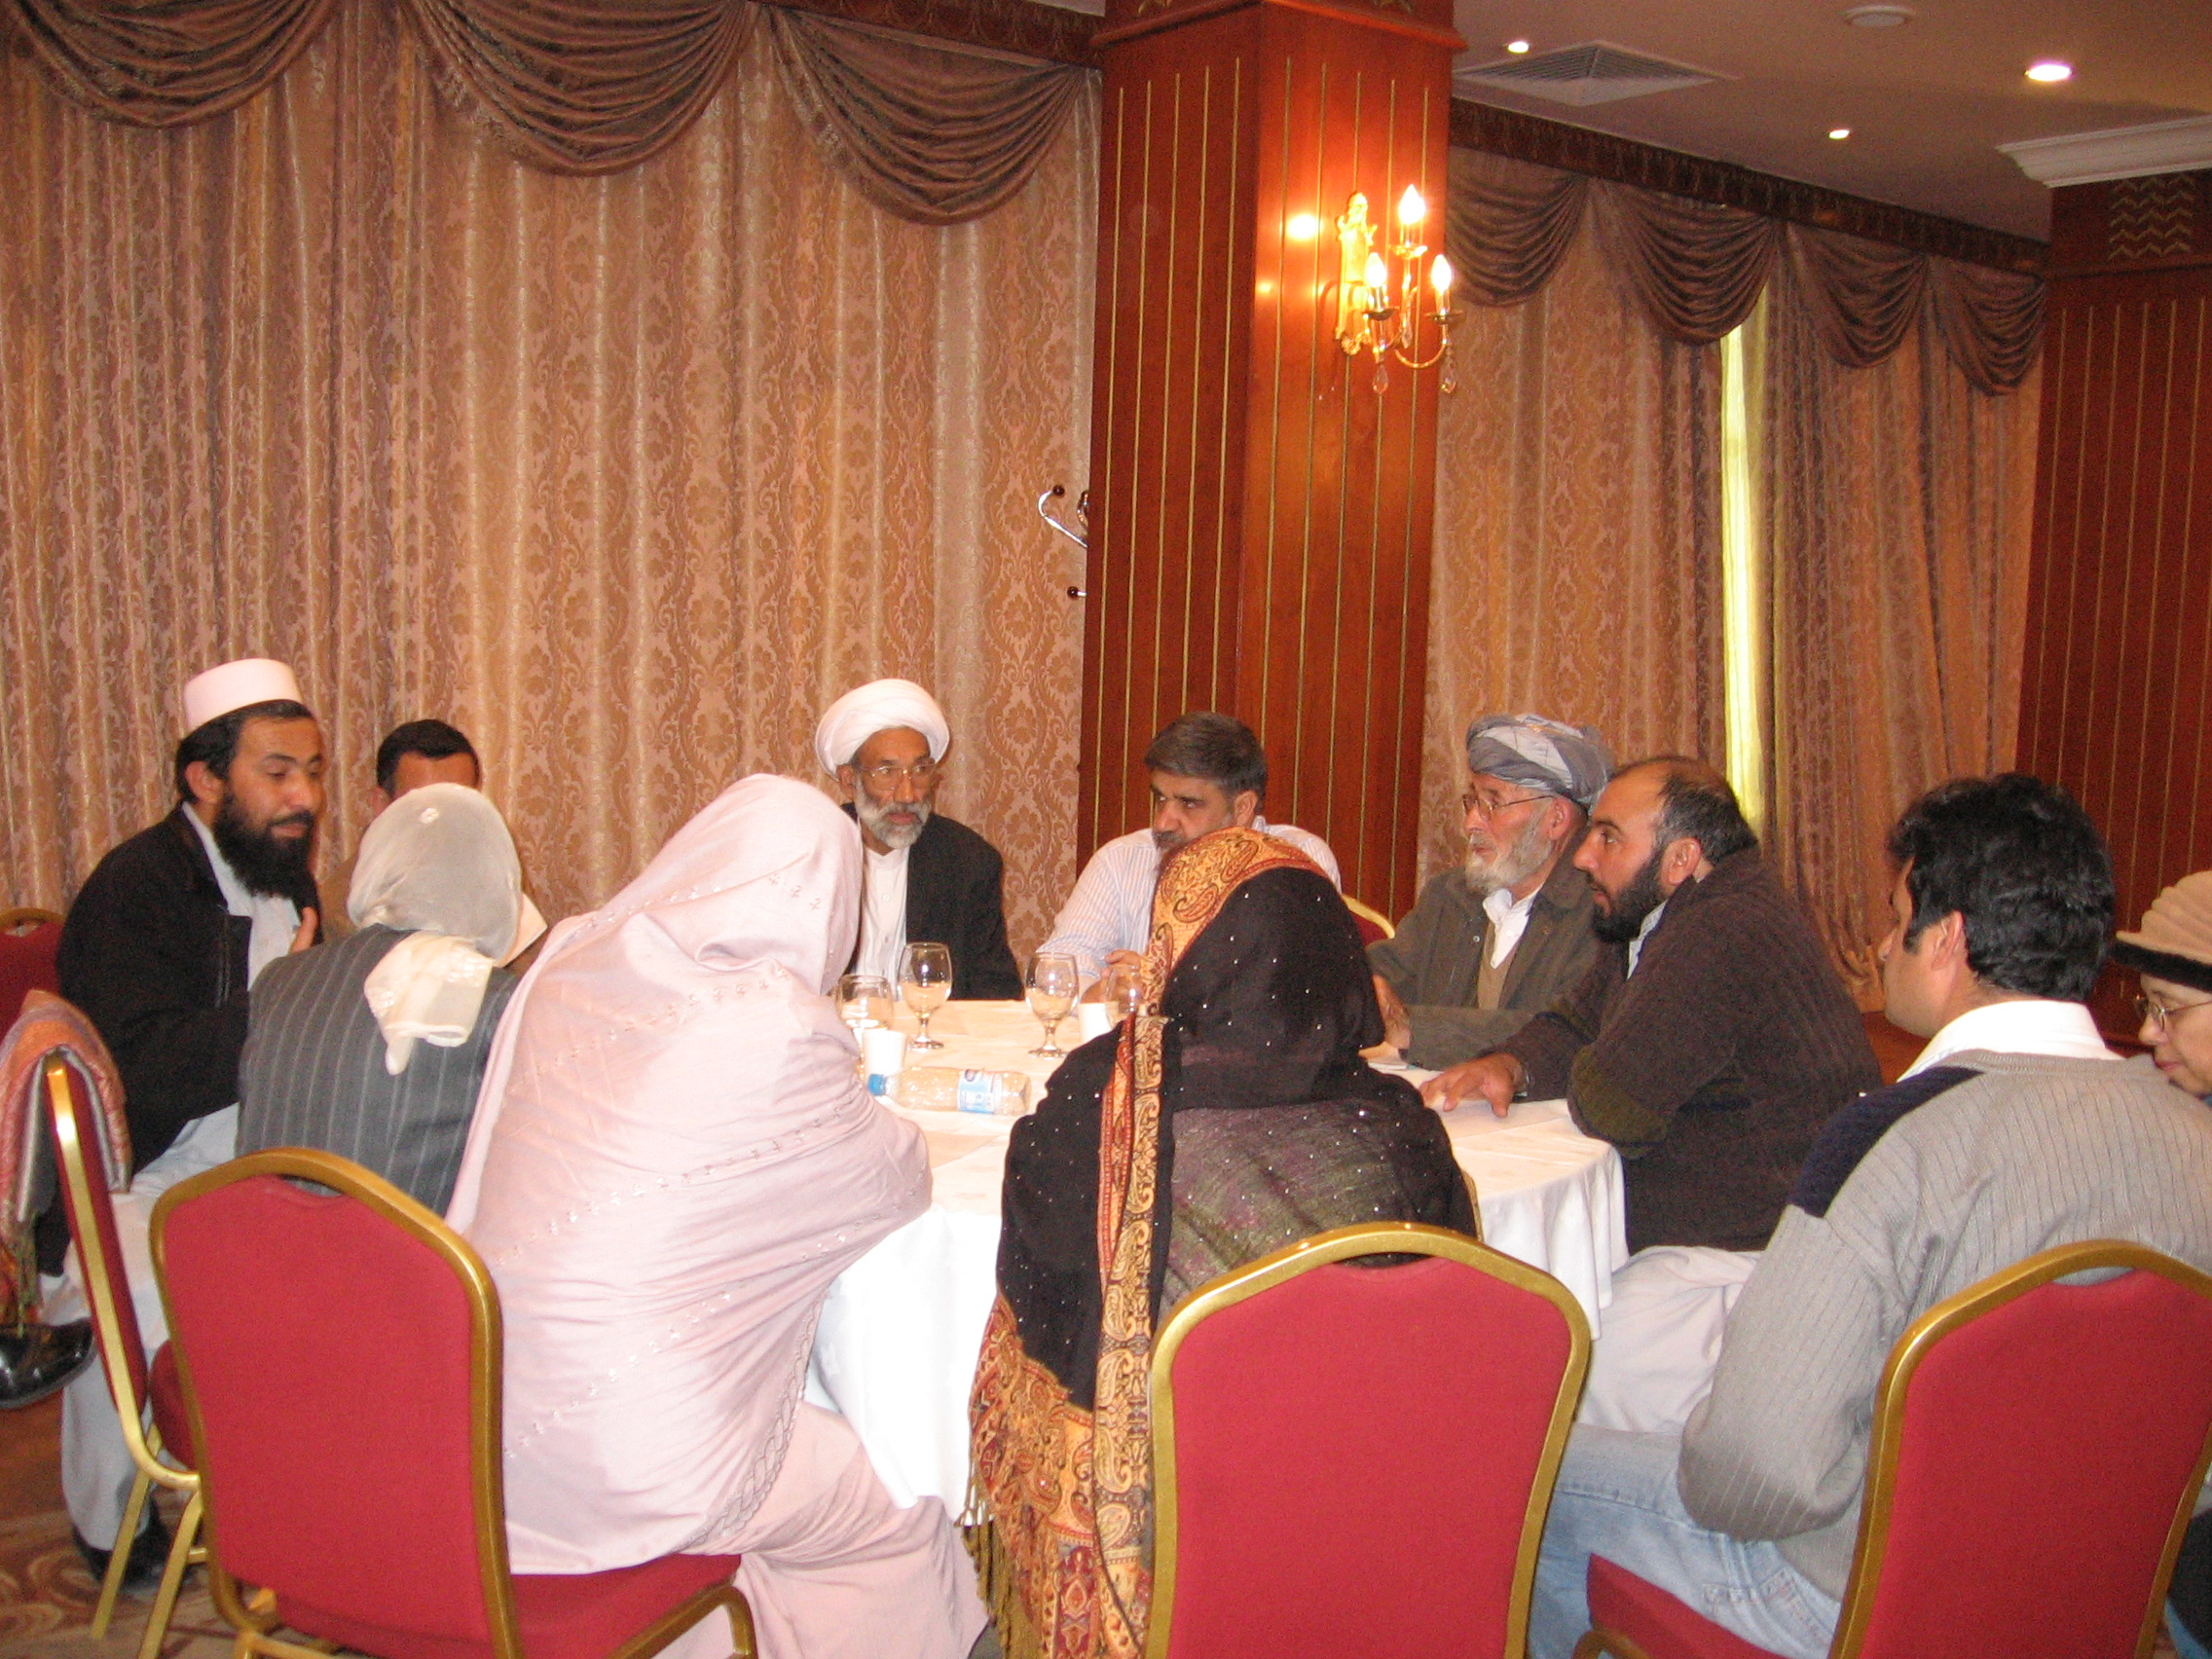 Roundtable discussion with conference participants 